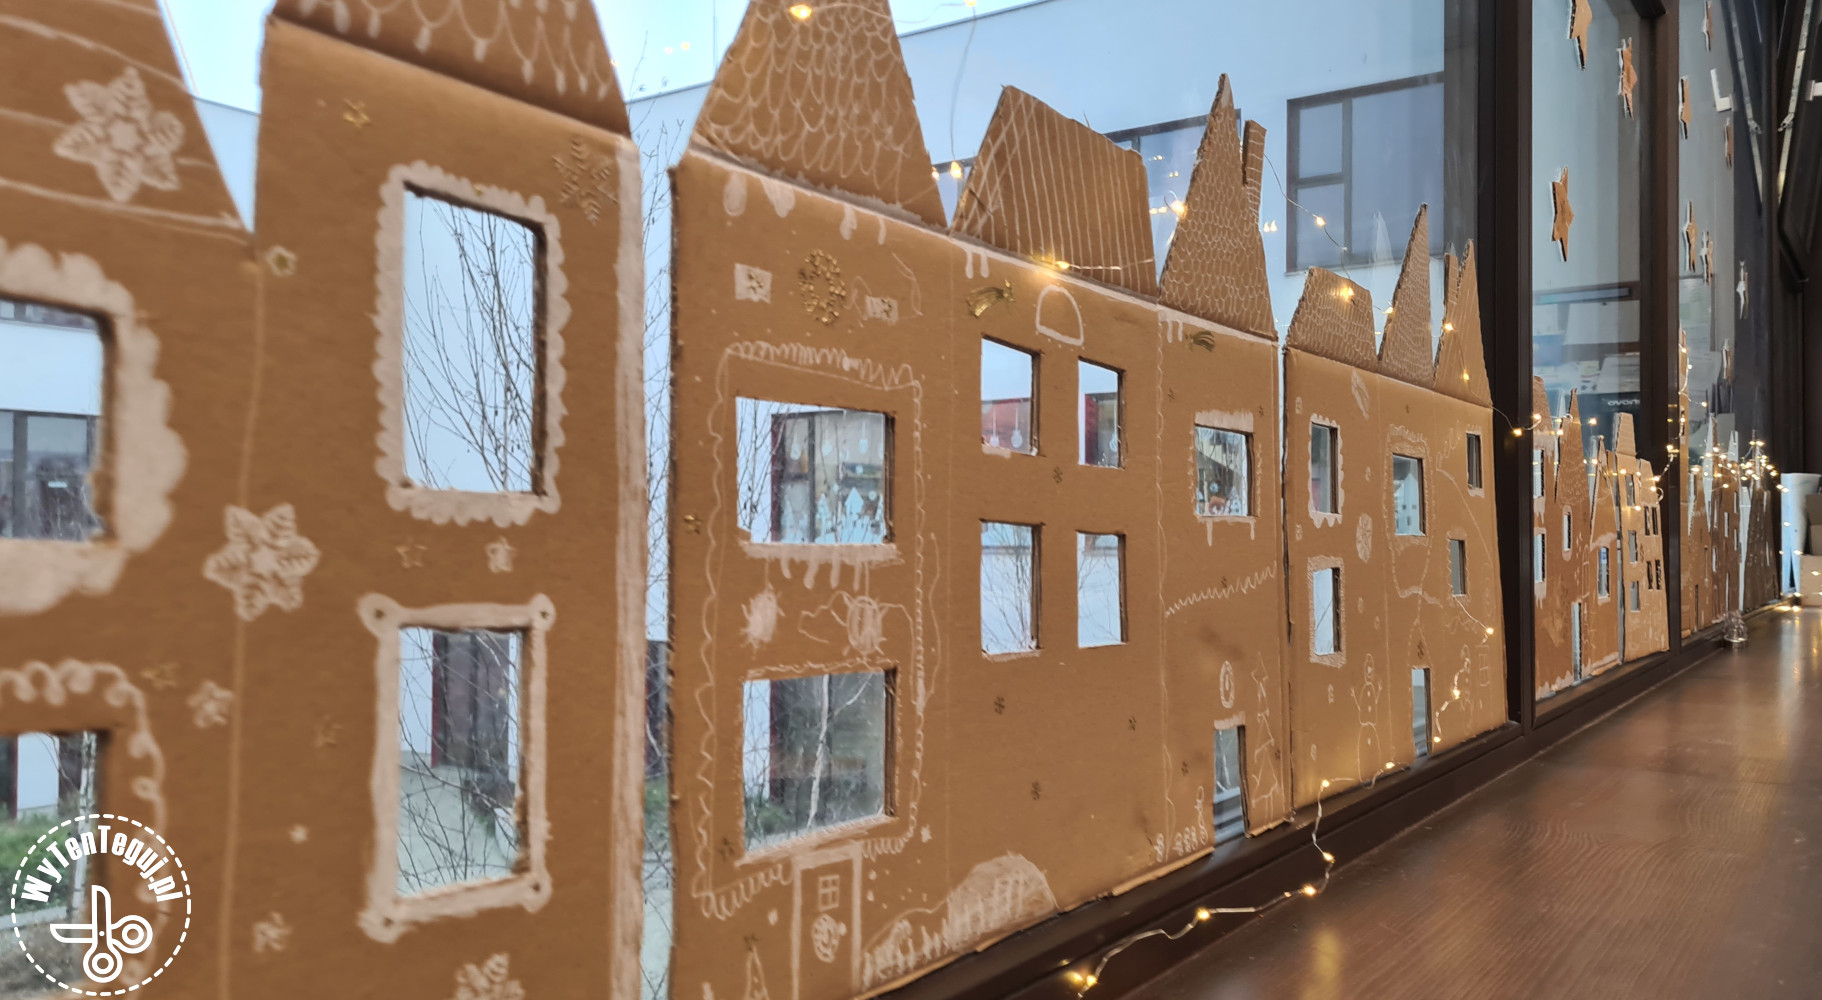 How to make a Christmas gingerbread houses with cardboard